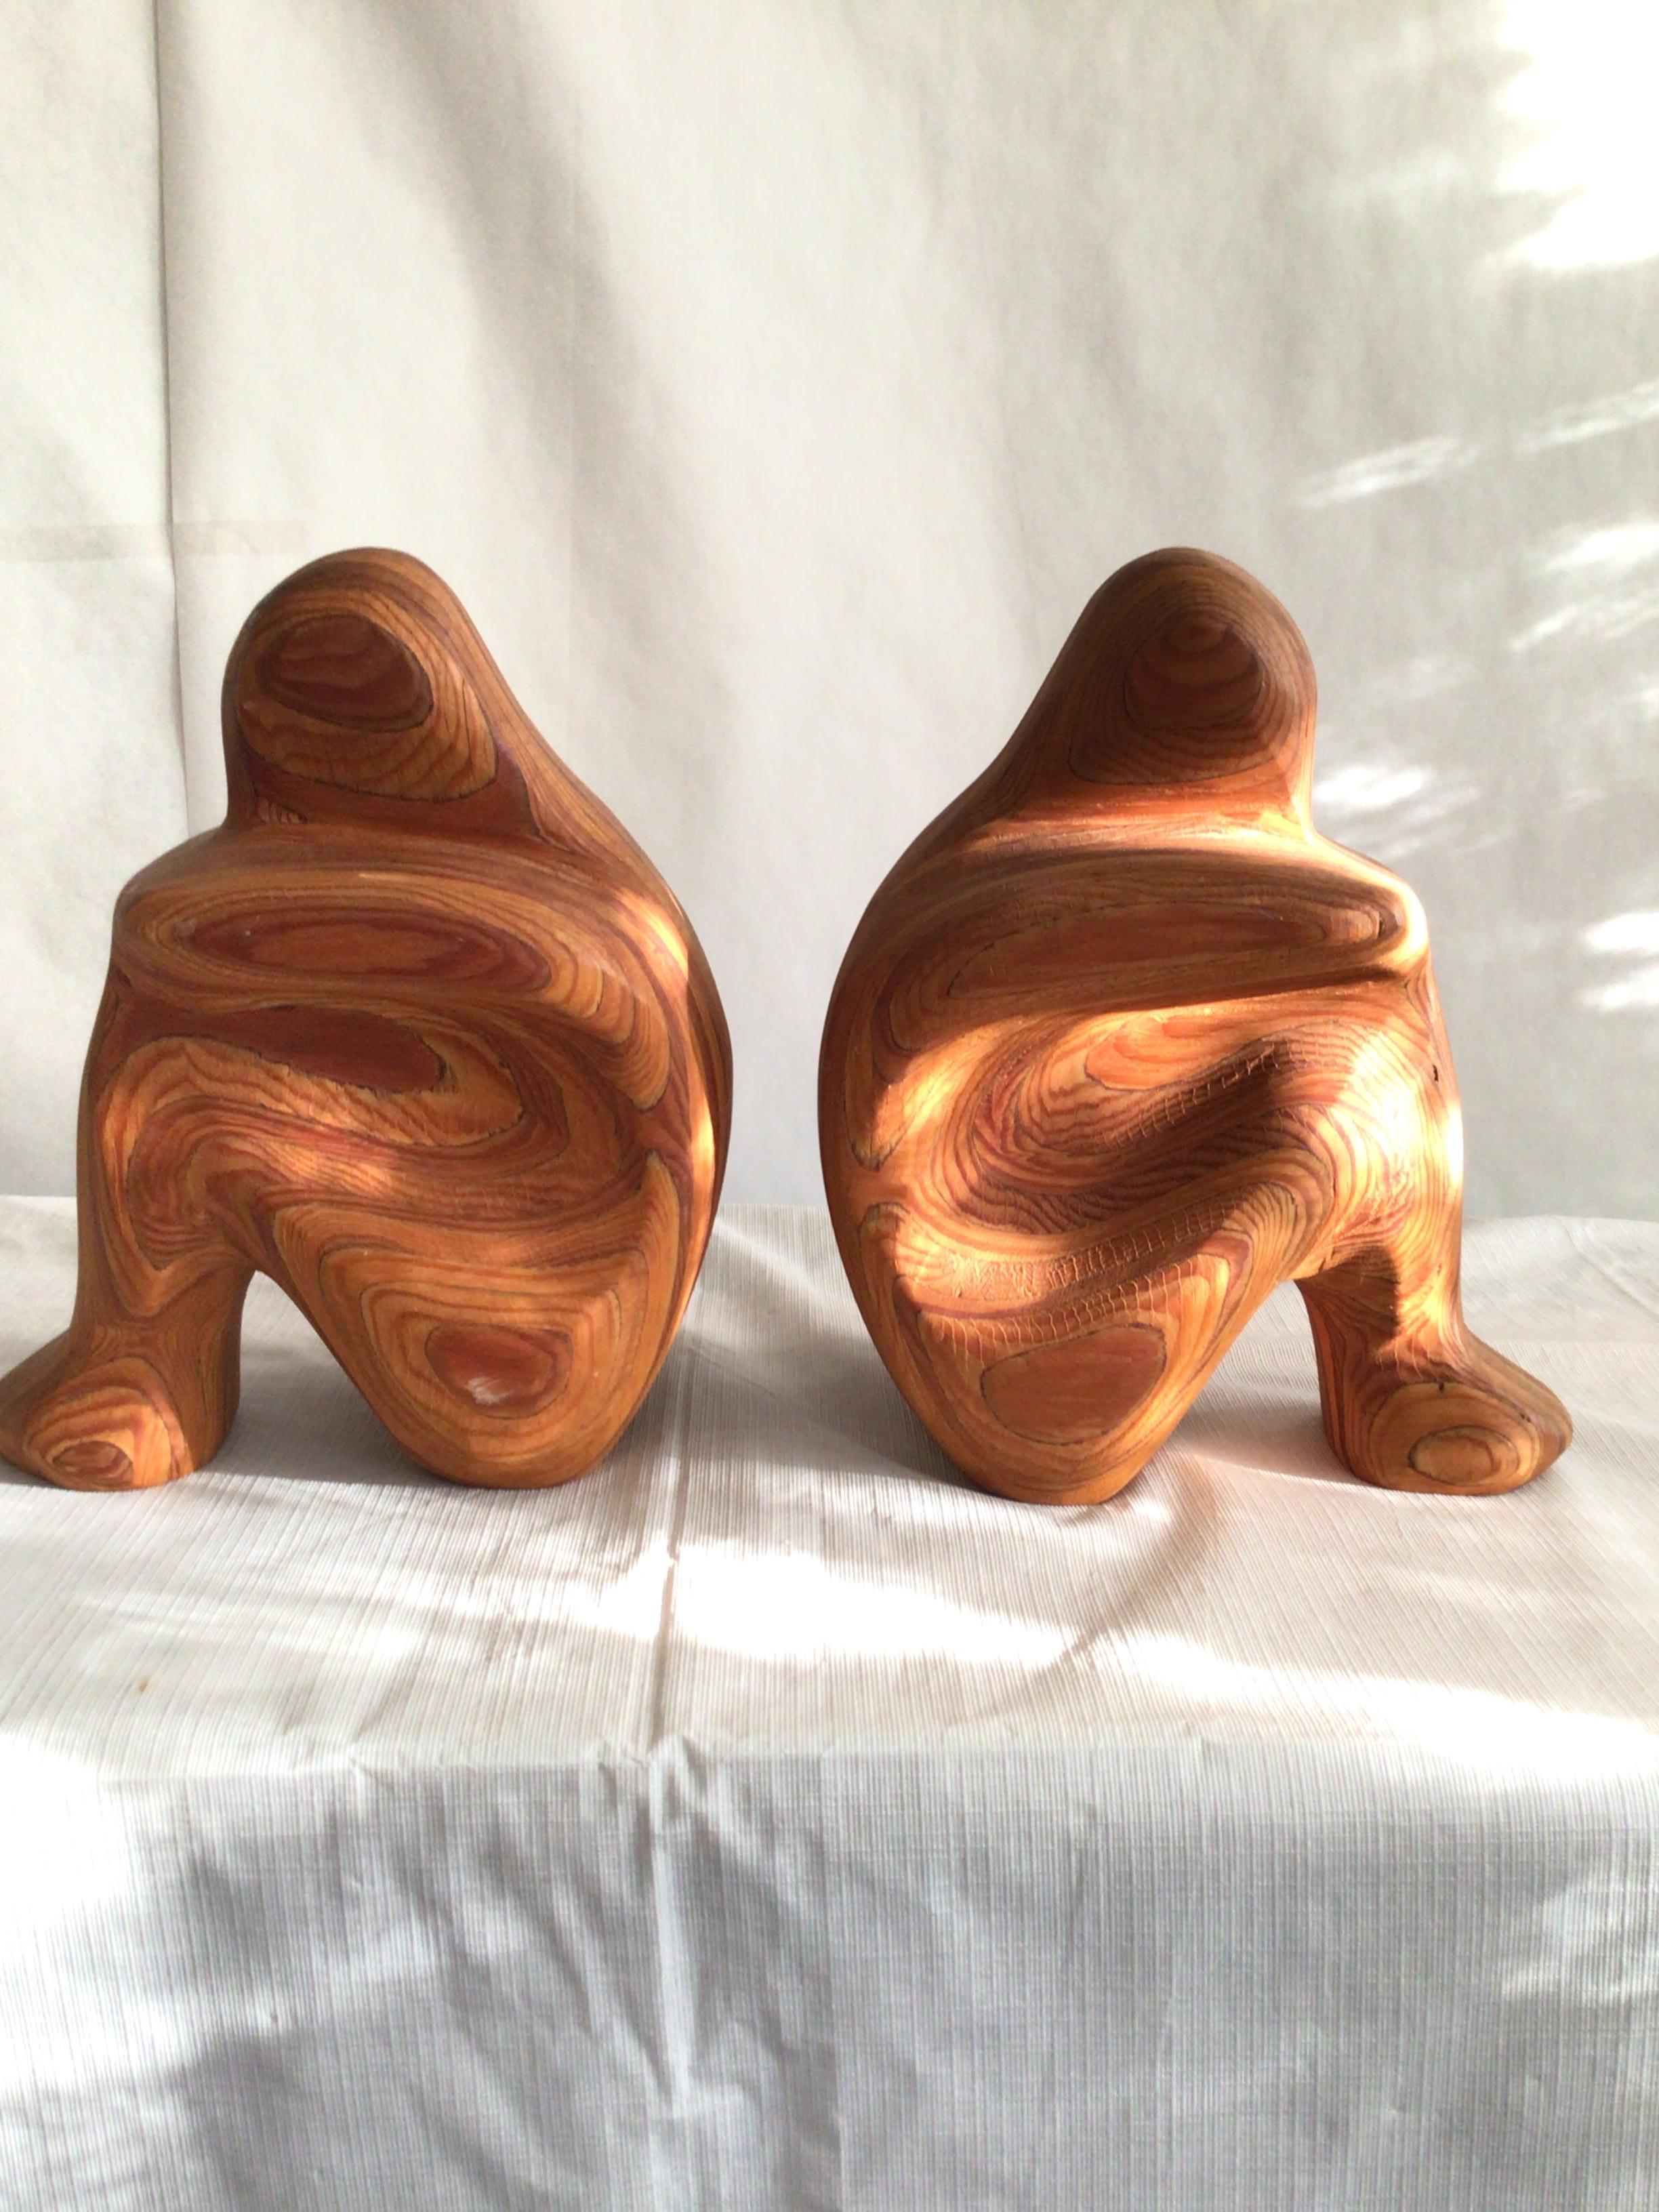 Pair of 1980s swirled wood sculptural bookends is signed: Largrave. 
The golden color wood grain adds depth and character to these functional objects.